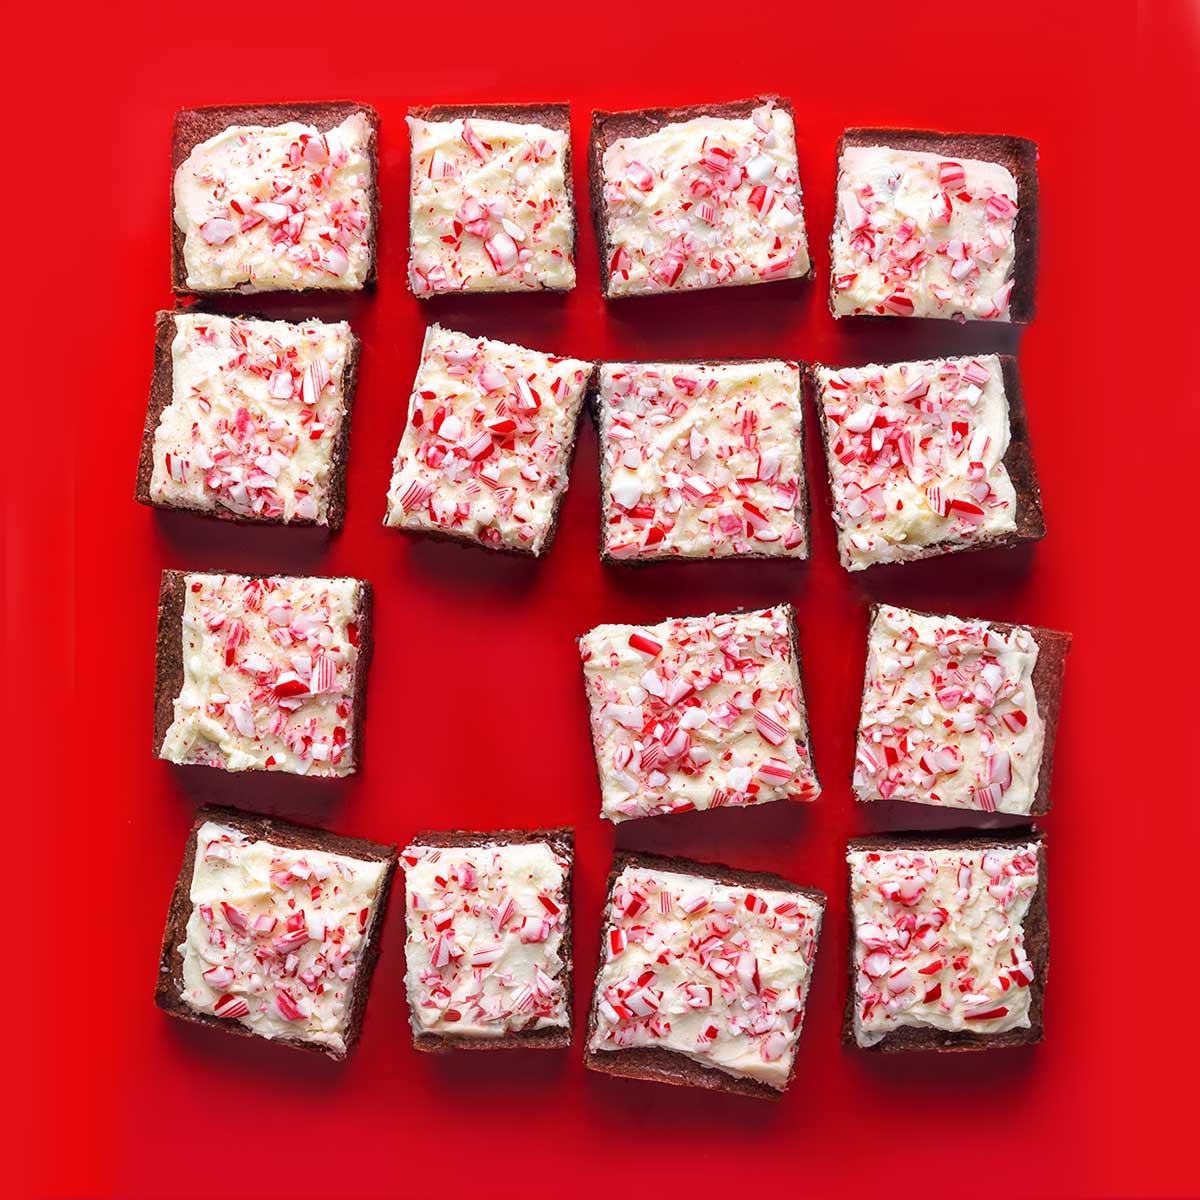 Fifteen brownies, frosted with white frosting and speckled with crushed peppermint candies.